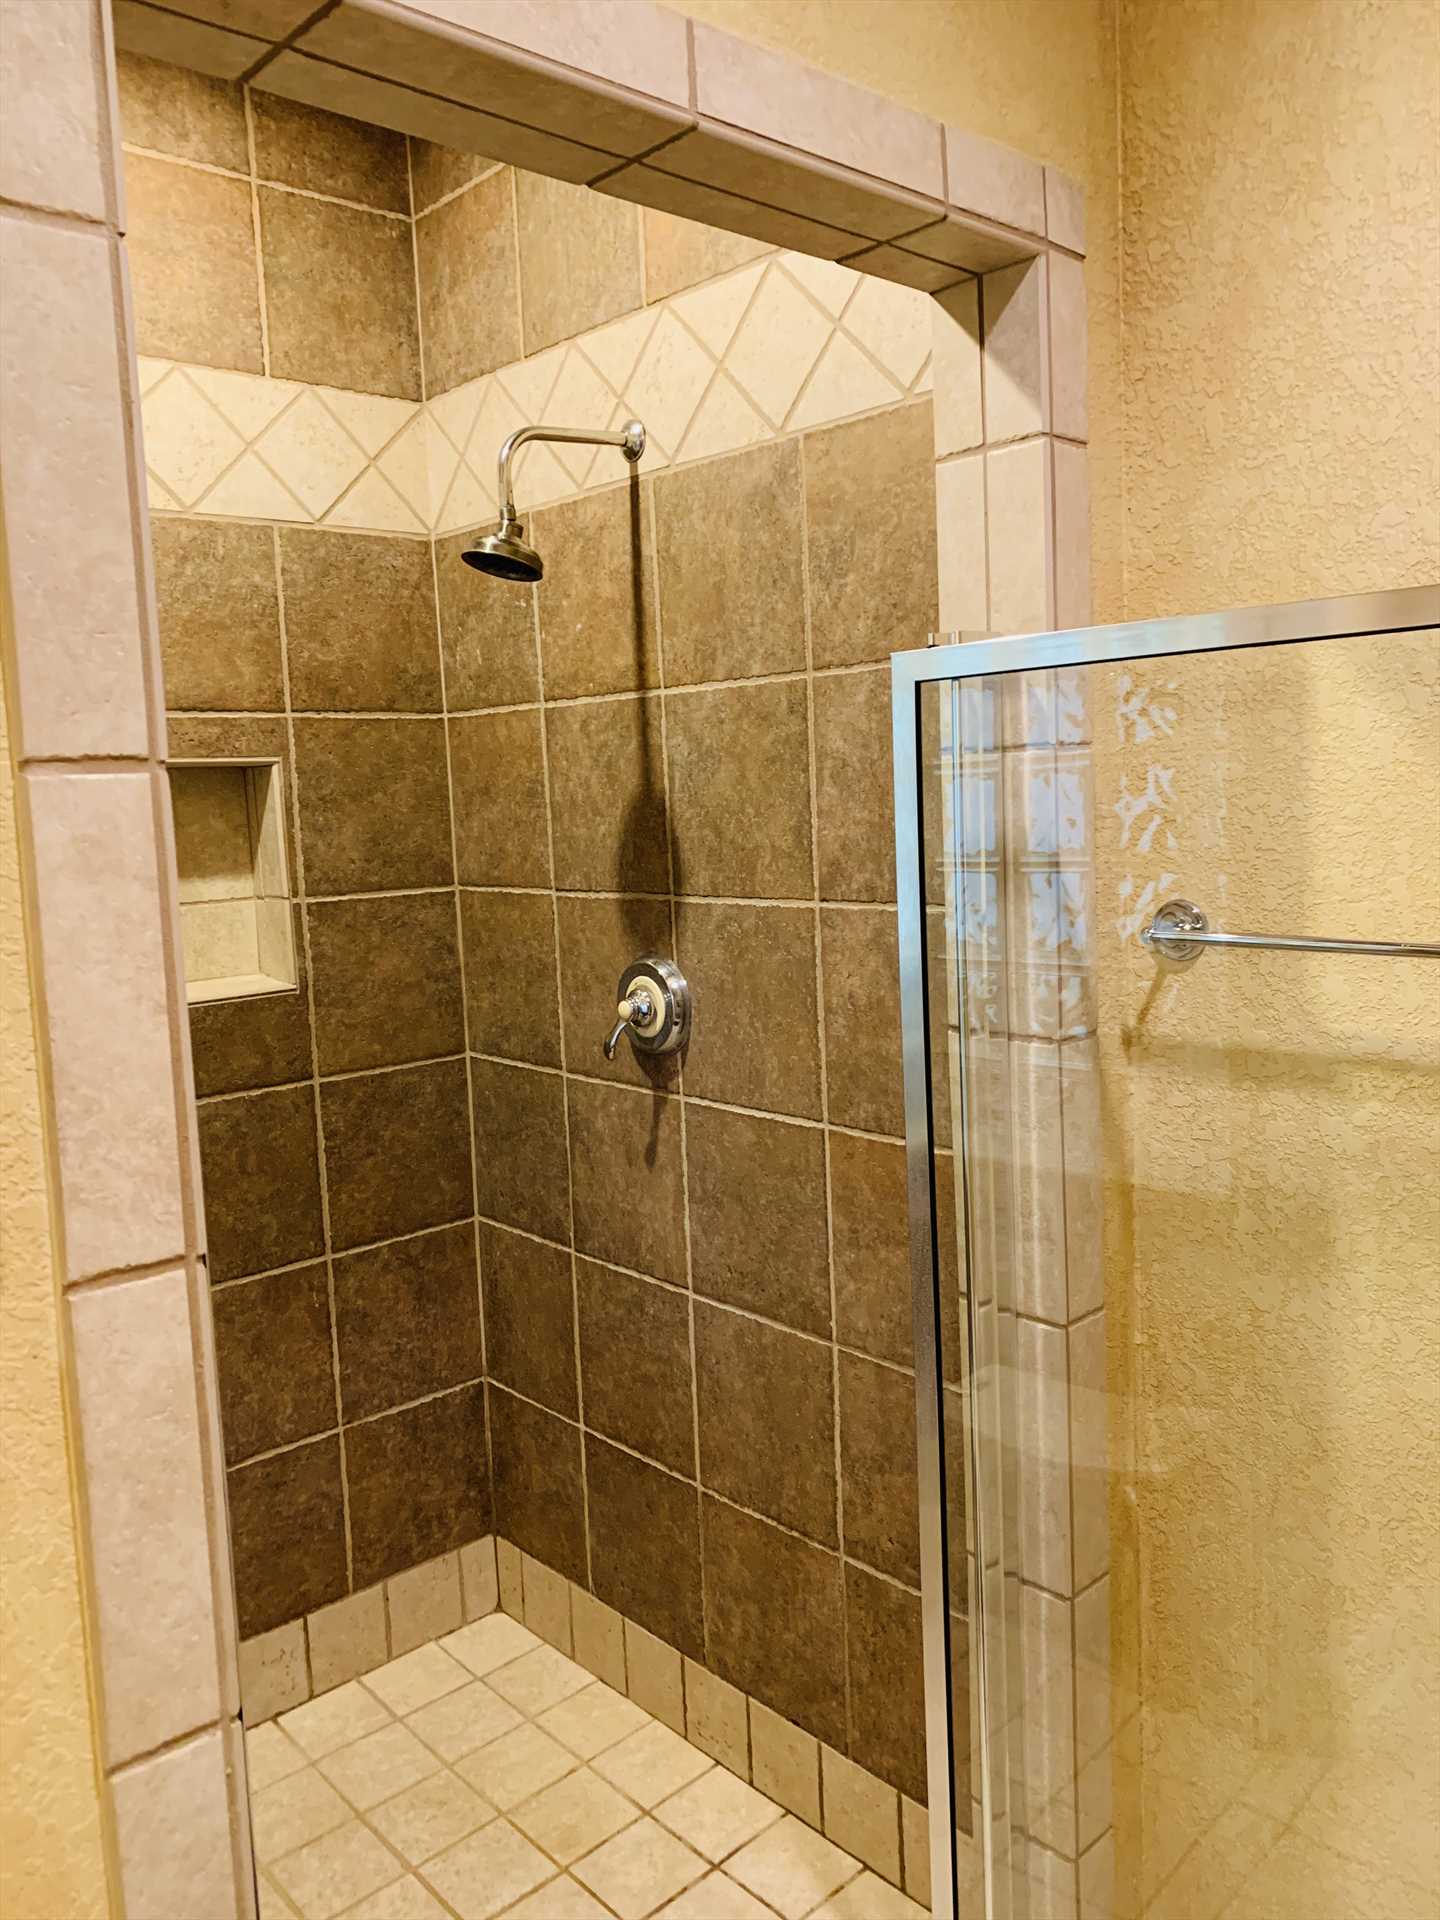                                                 The gigantic master bath is rounded out by a roomy and immaculately-clean walk-in shower!